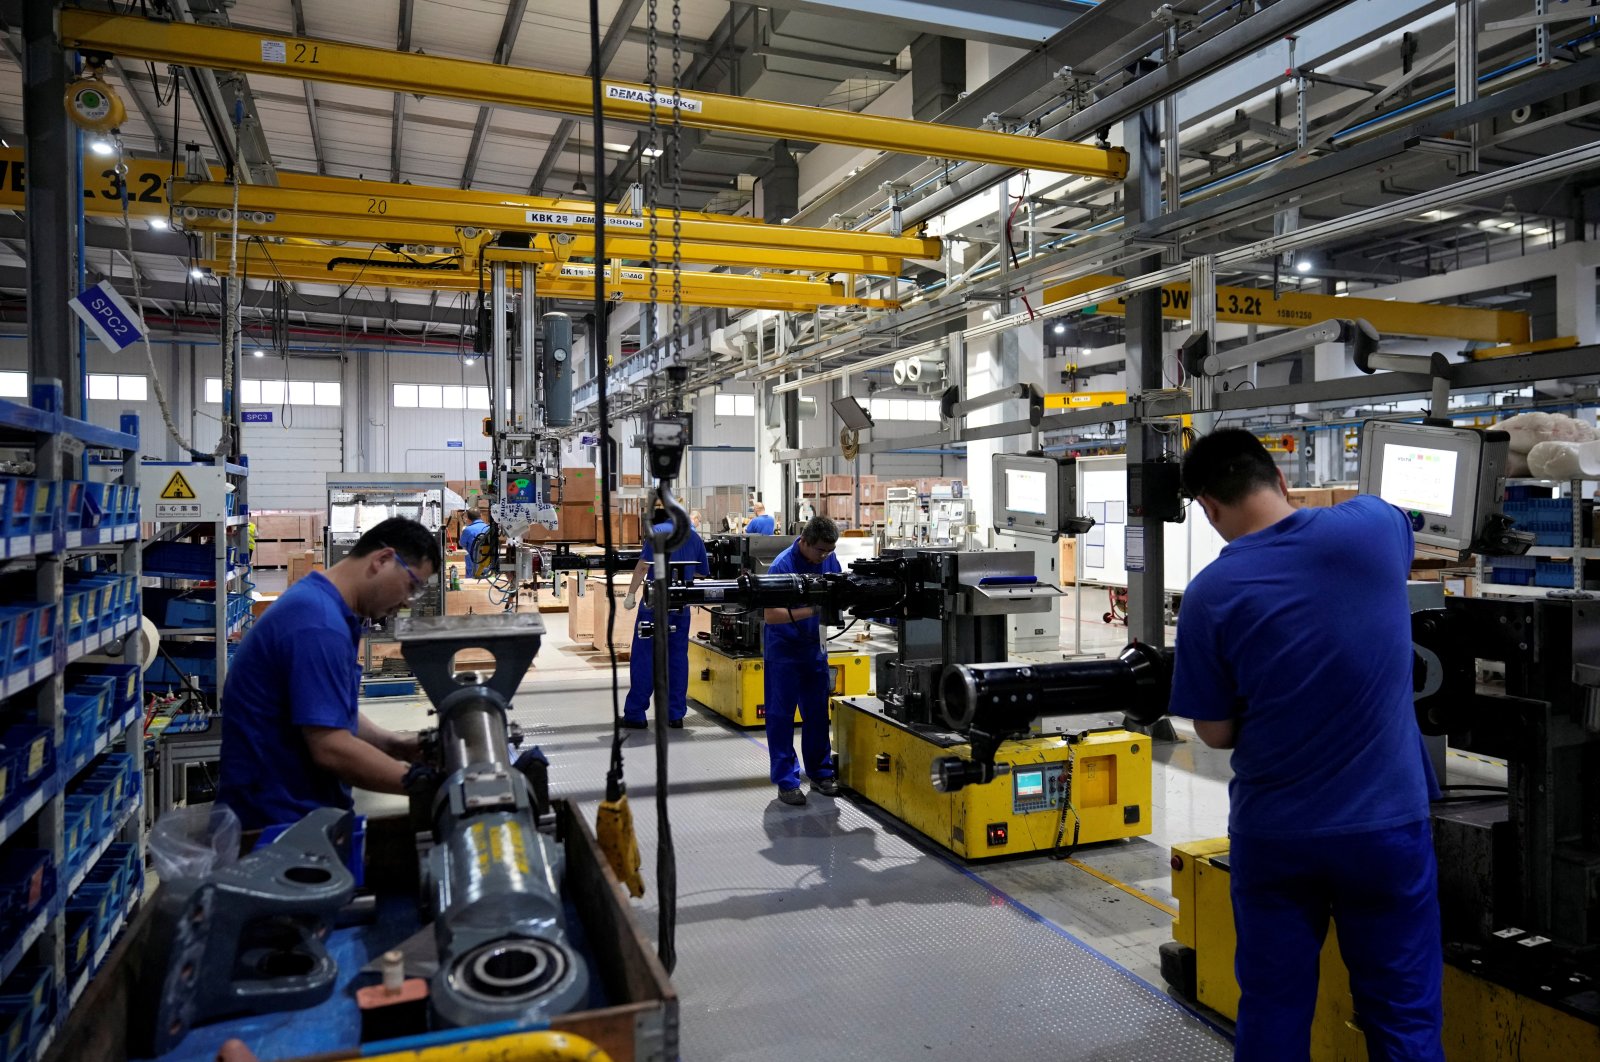 Employees work on the production line of vehicle components at a factory of German engineering group Voith in Shanghai, China, July 21, 2022. (Reuters Photo)